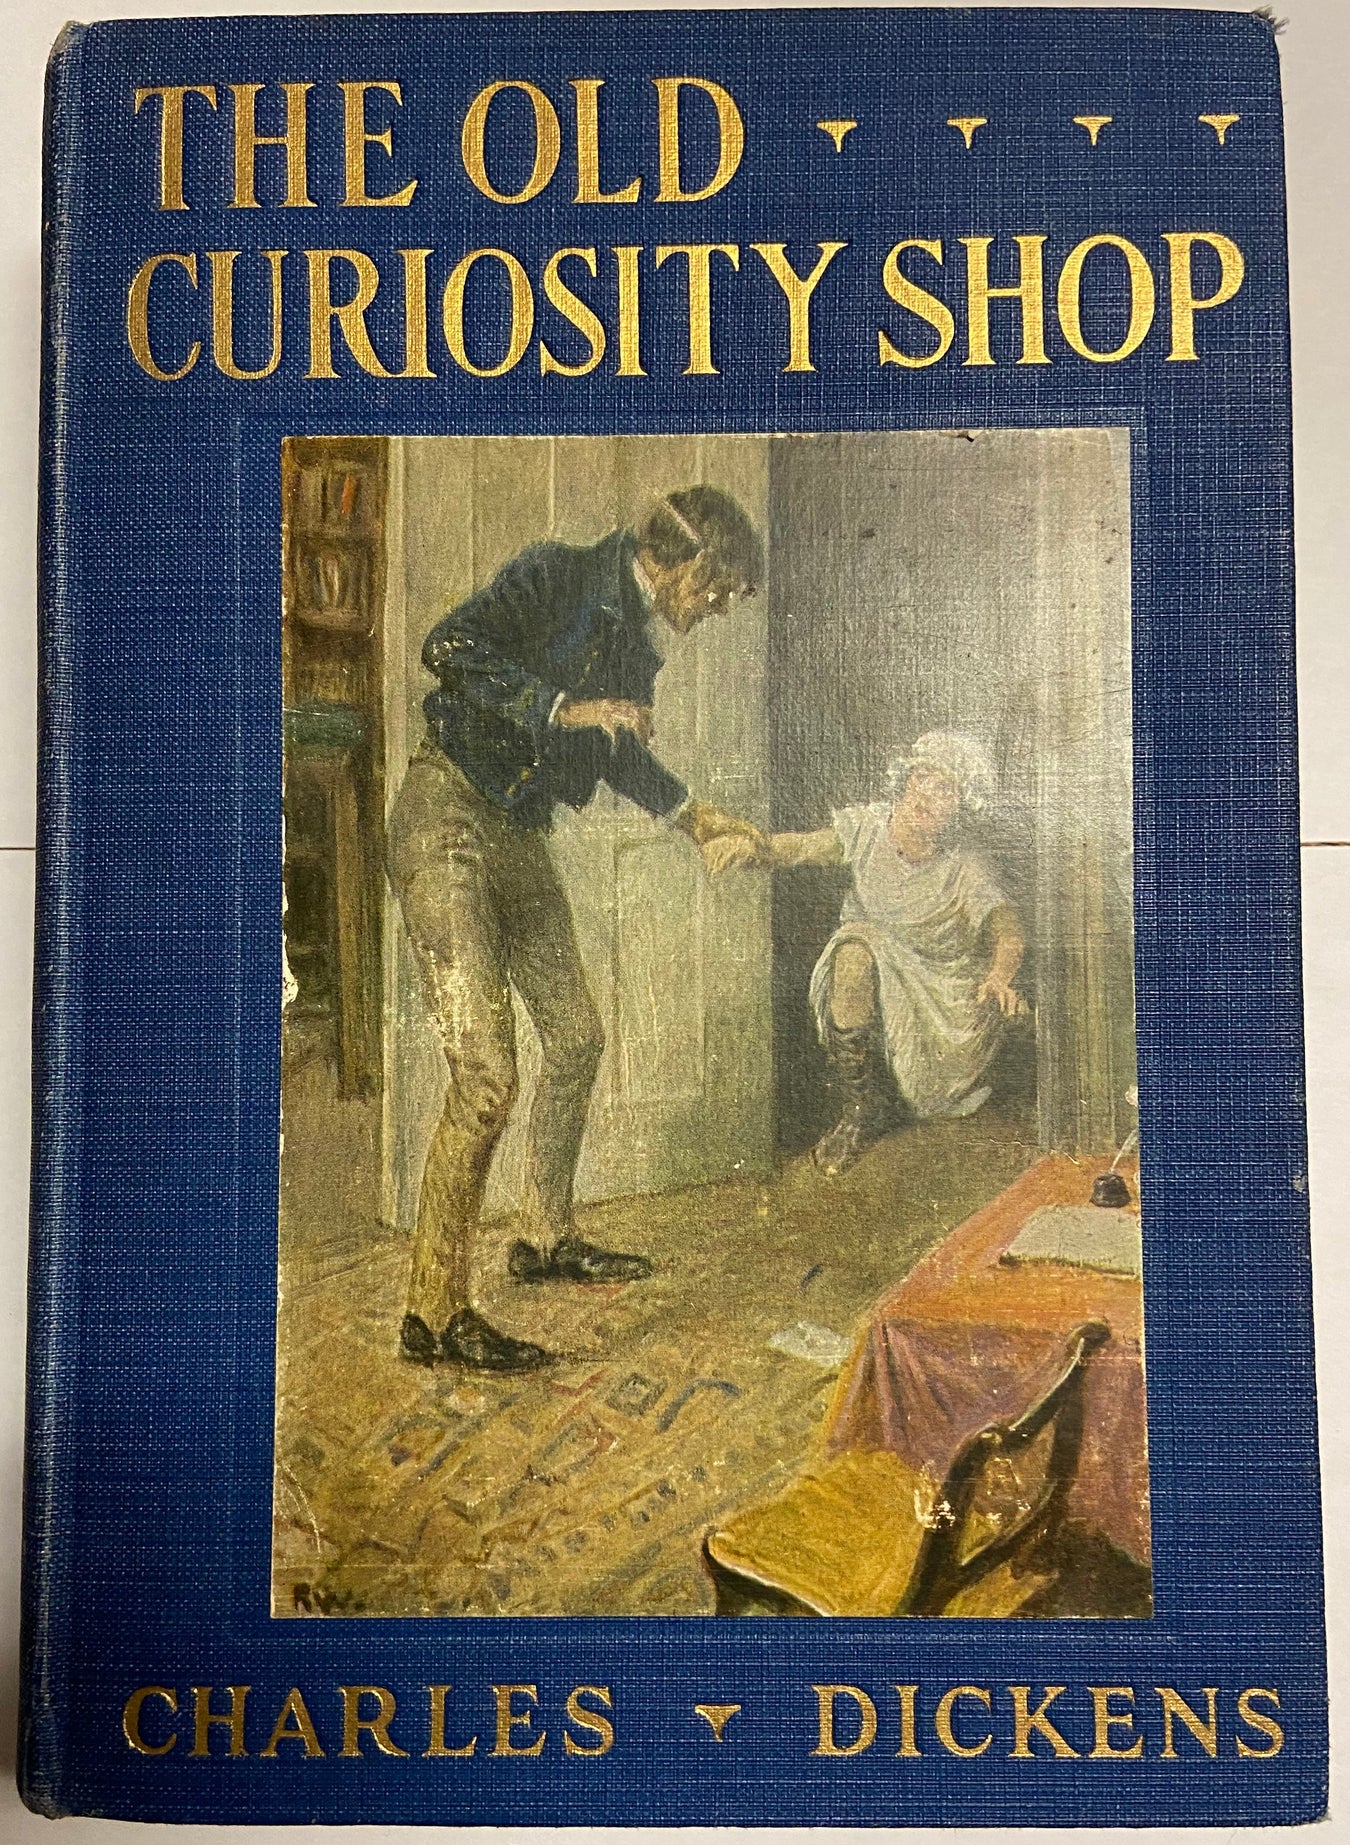 the old curiosity shop by charles dickens vintage cover